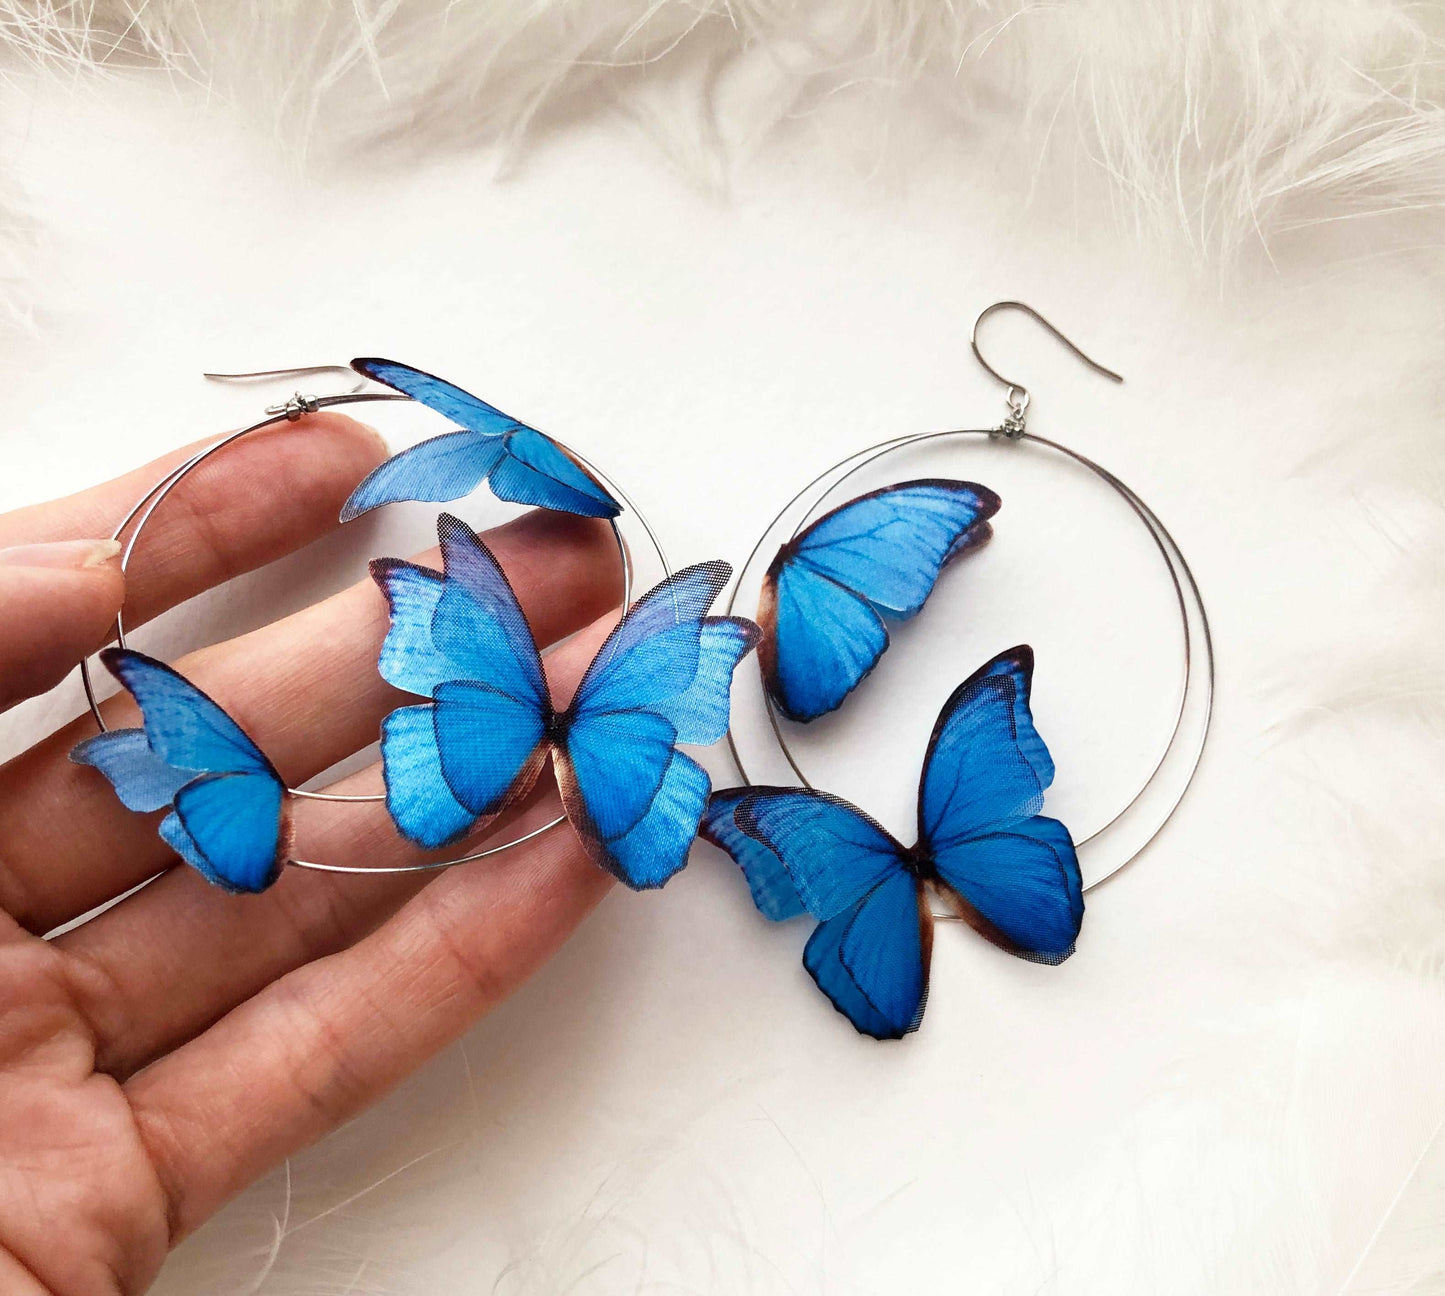 Close-up of handmade Gunmetal color Hoop Earrings with delicate blue butterfly charms, perfect for adding a pop of color to any outfit